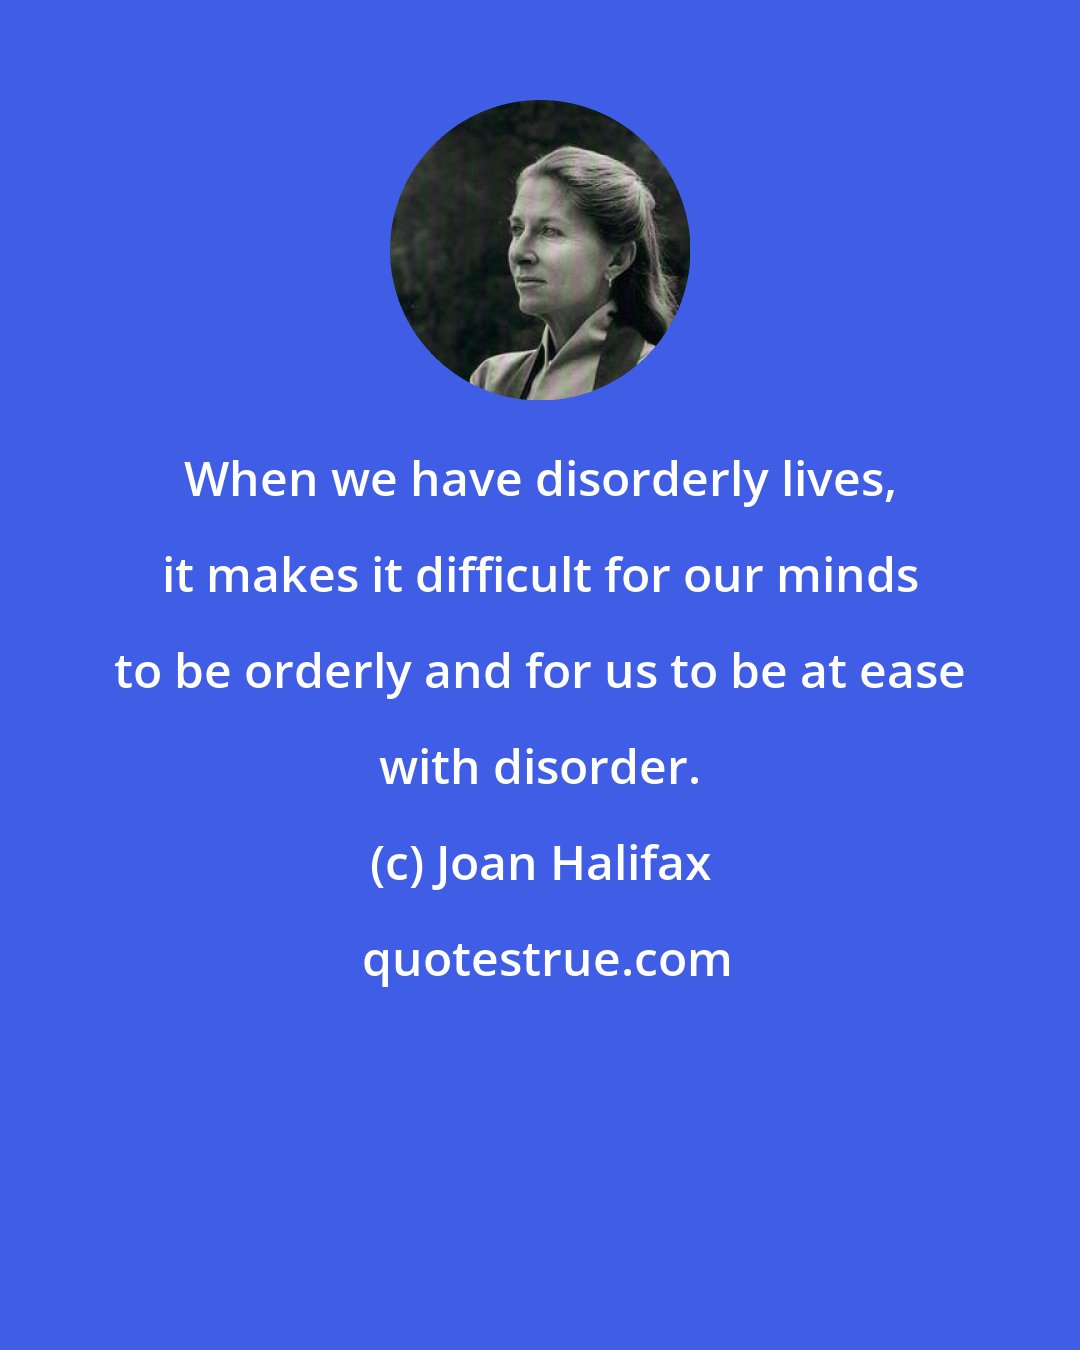 Joan Halifax: When we have disorderly lives, it makes it difficult for our minds to be orderly and for us to be at ease with disorder.